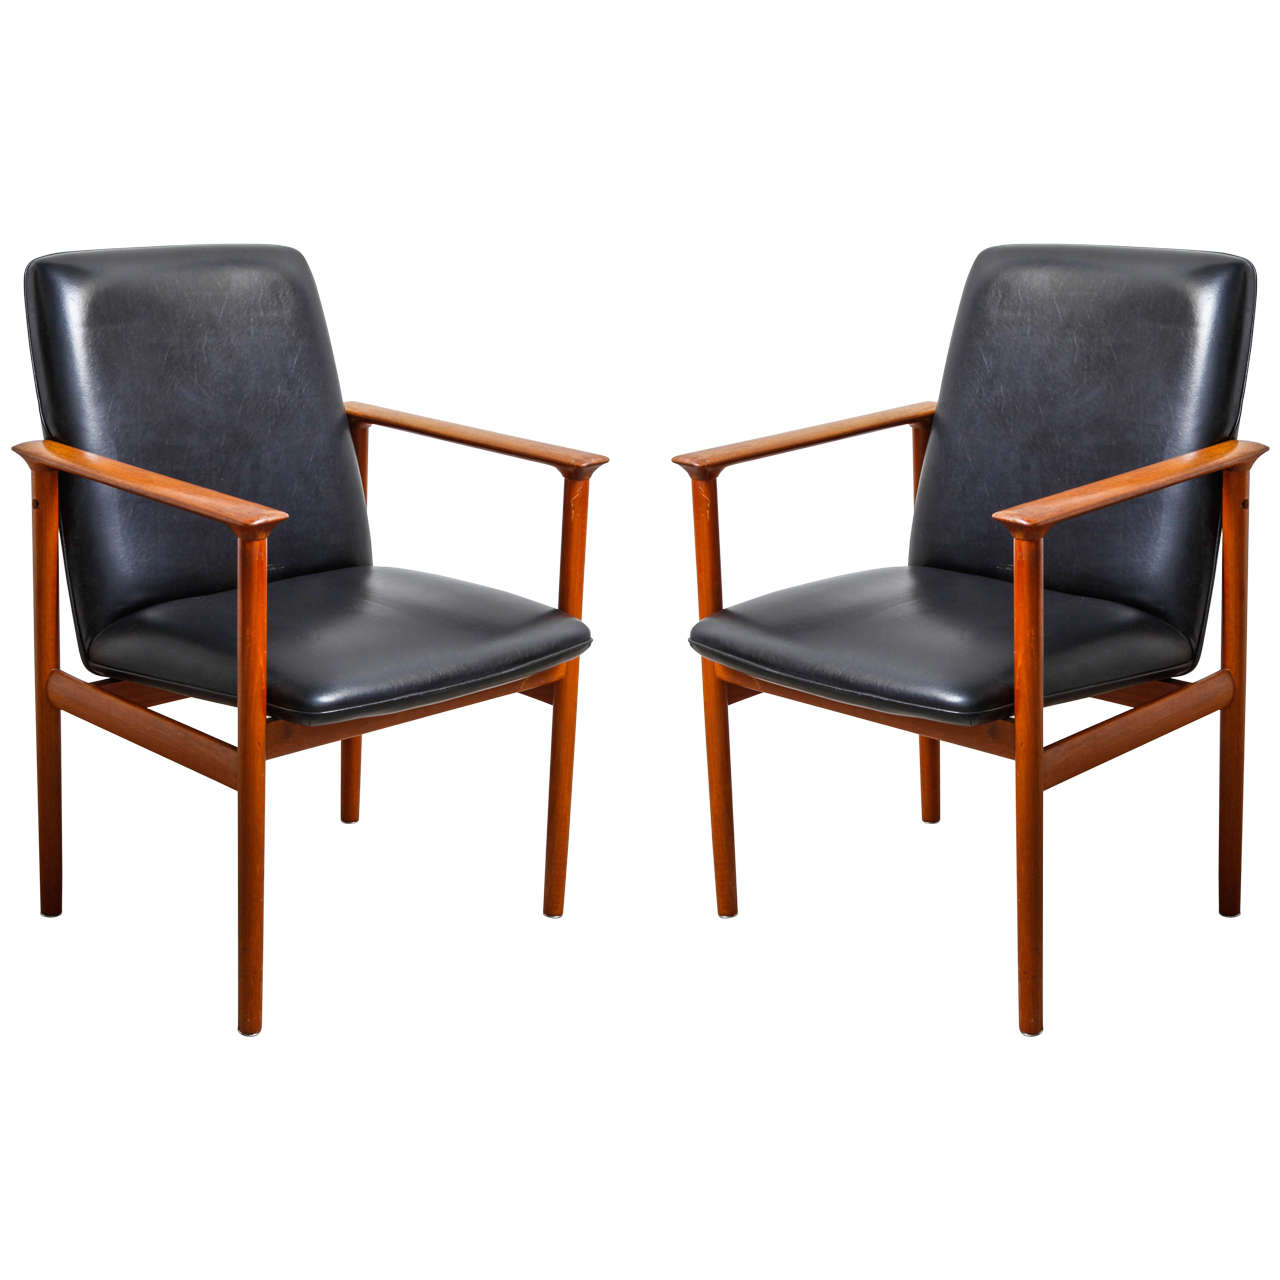 Set of Two Diplomat Chairs Designed by Arne Vodder